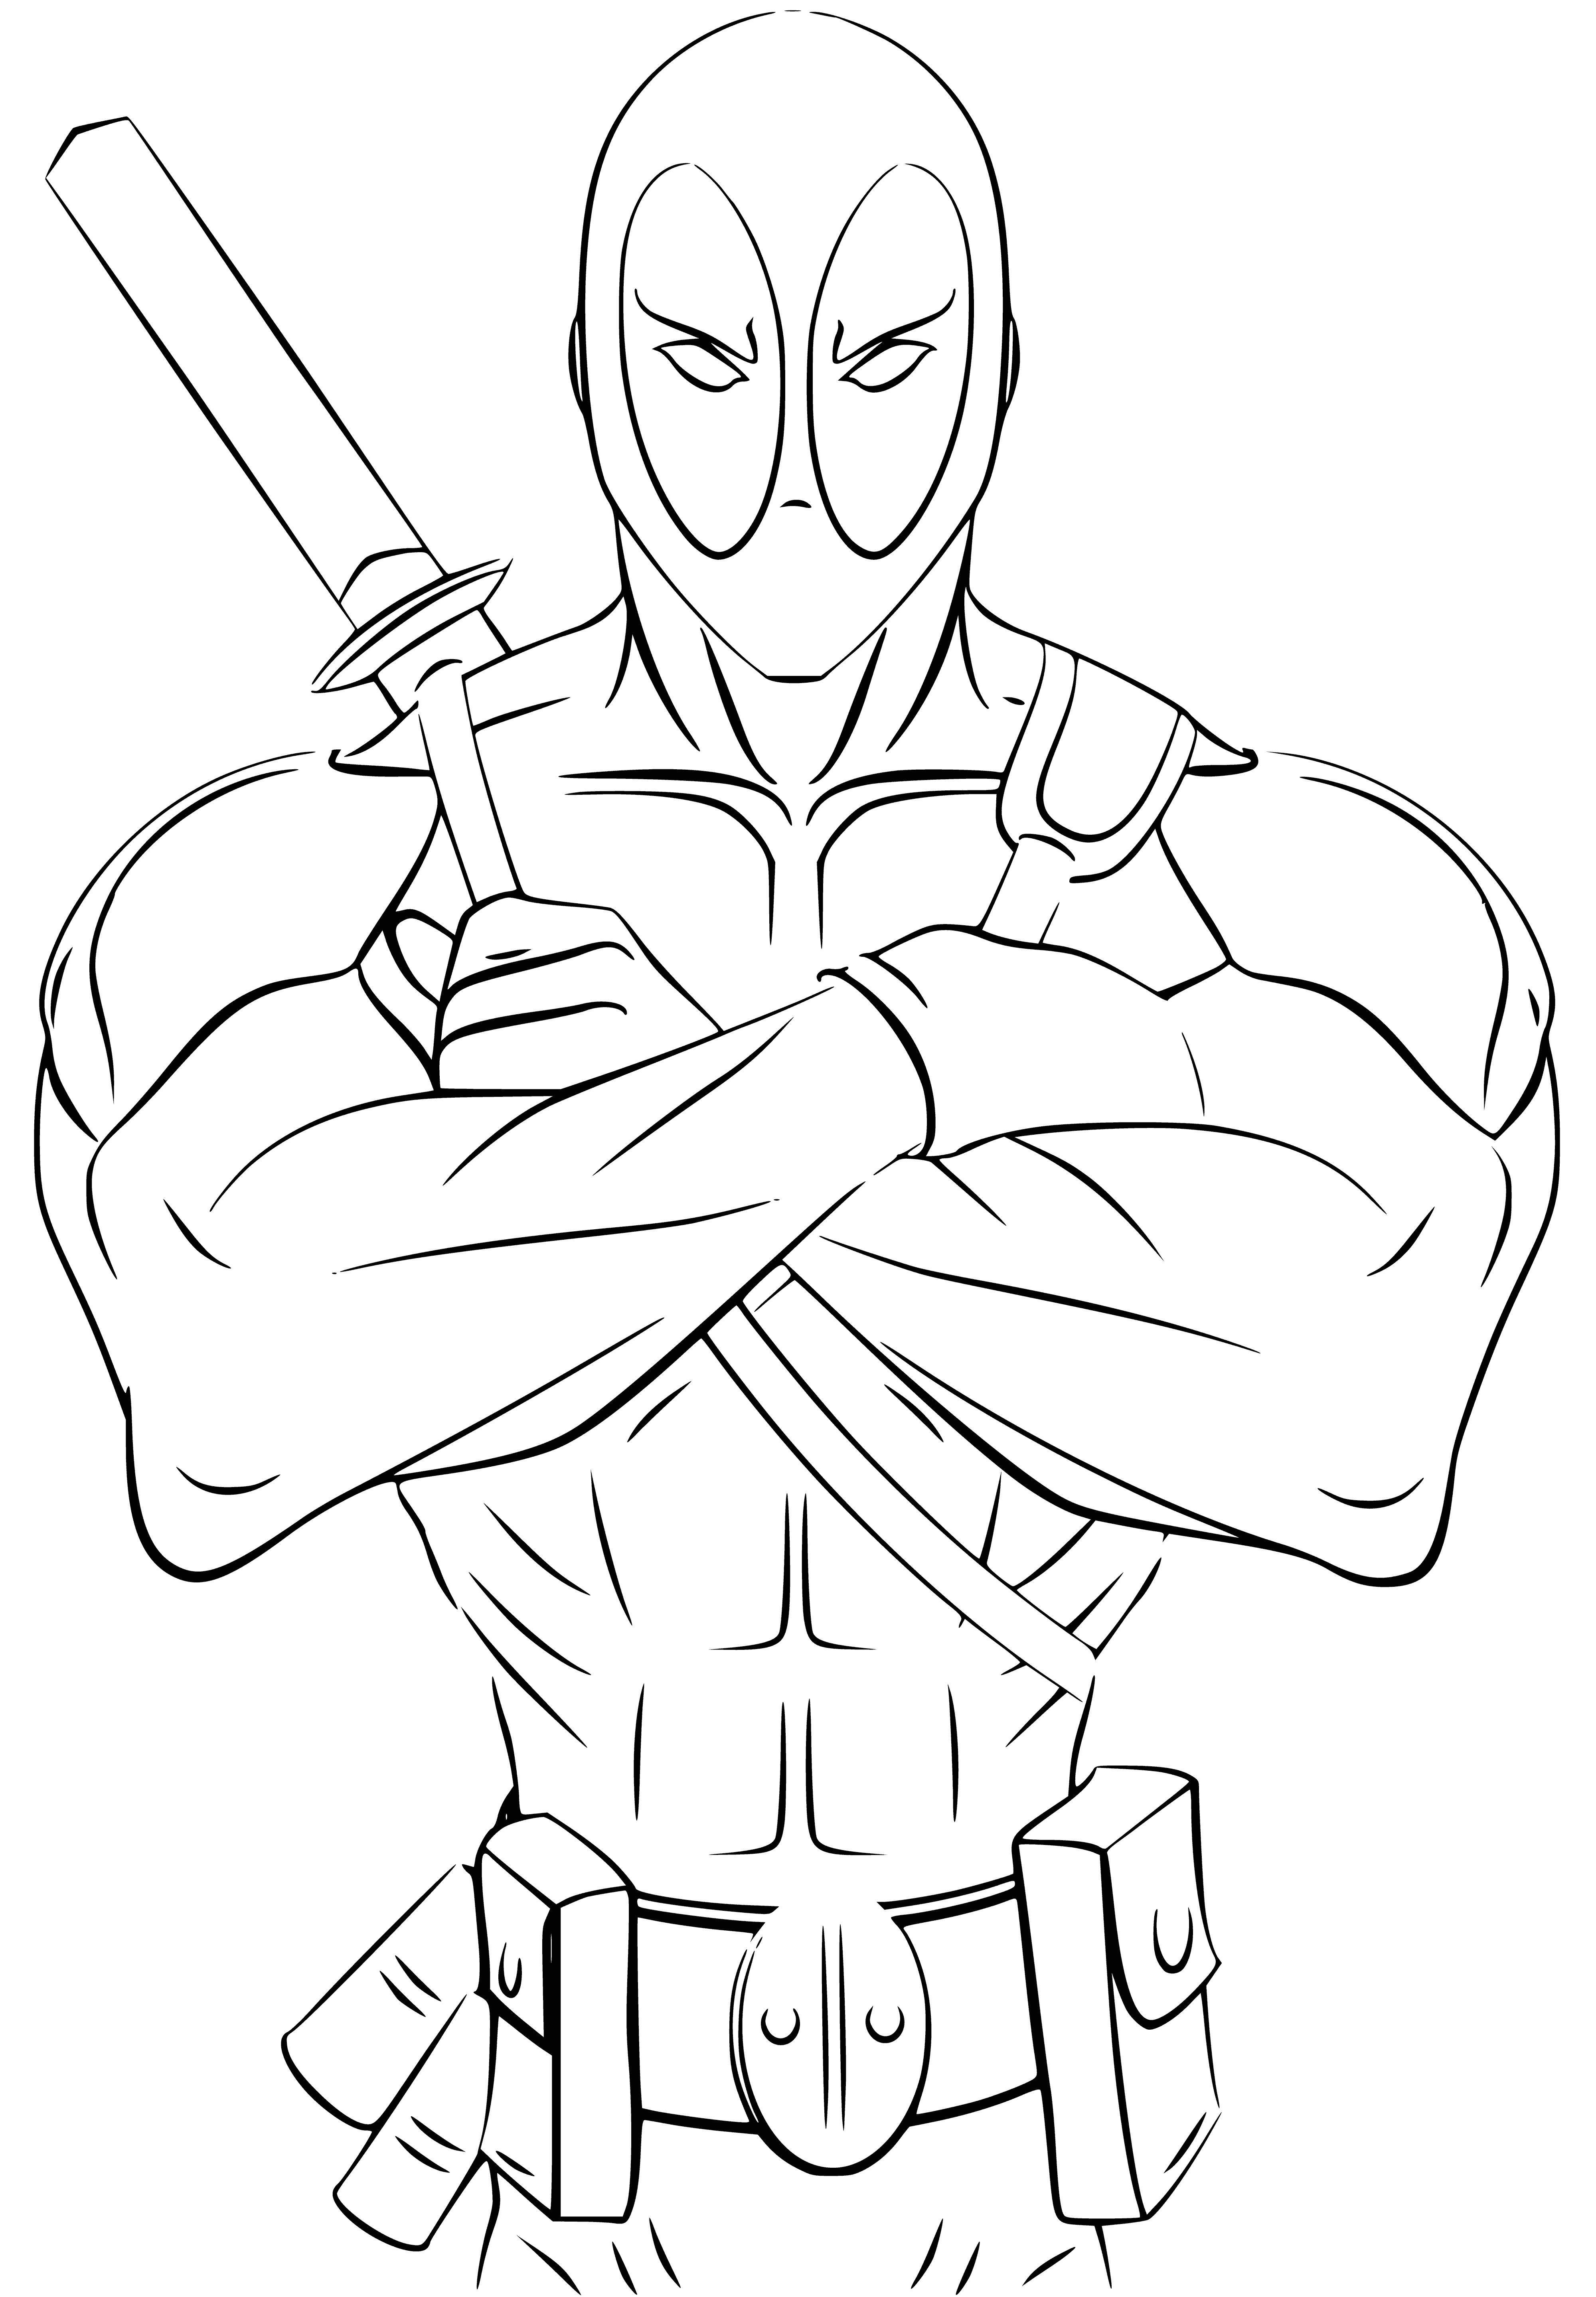 coloring page: Deadpool: Merc & anti-hero known for humor, antics & his healing factor which allows him to recover from injuries quickly.